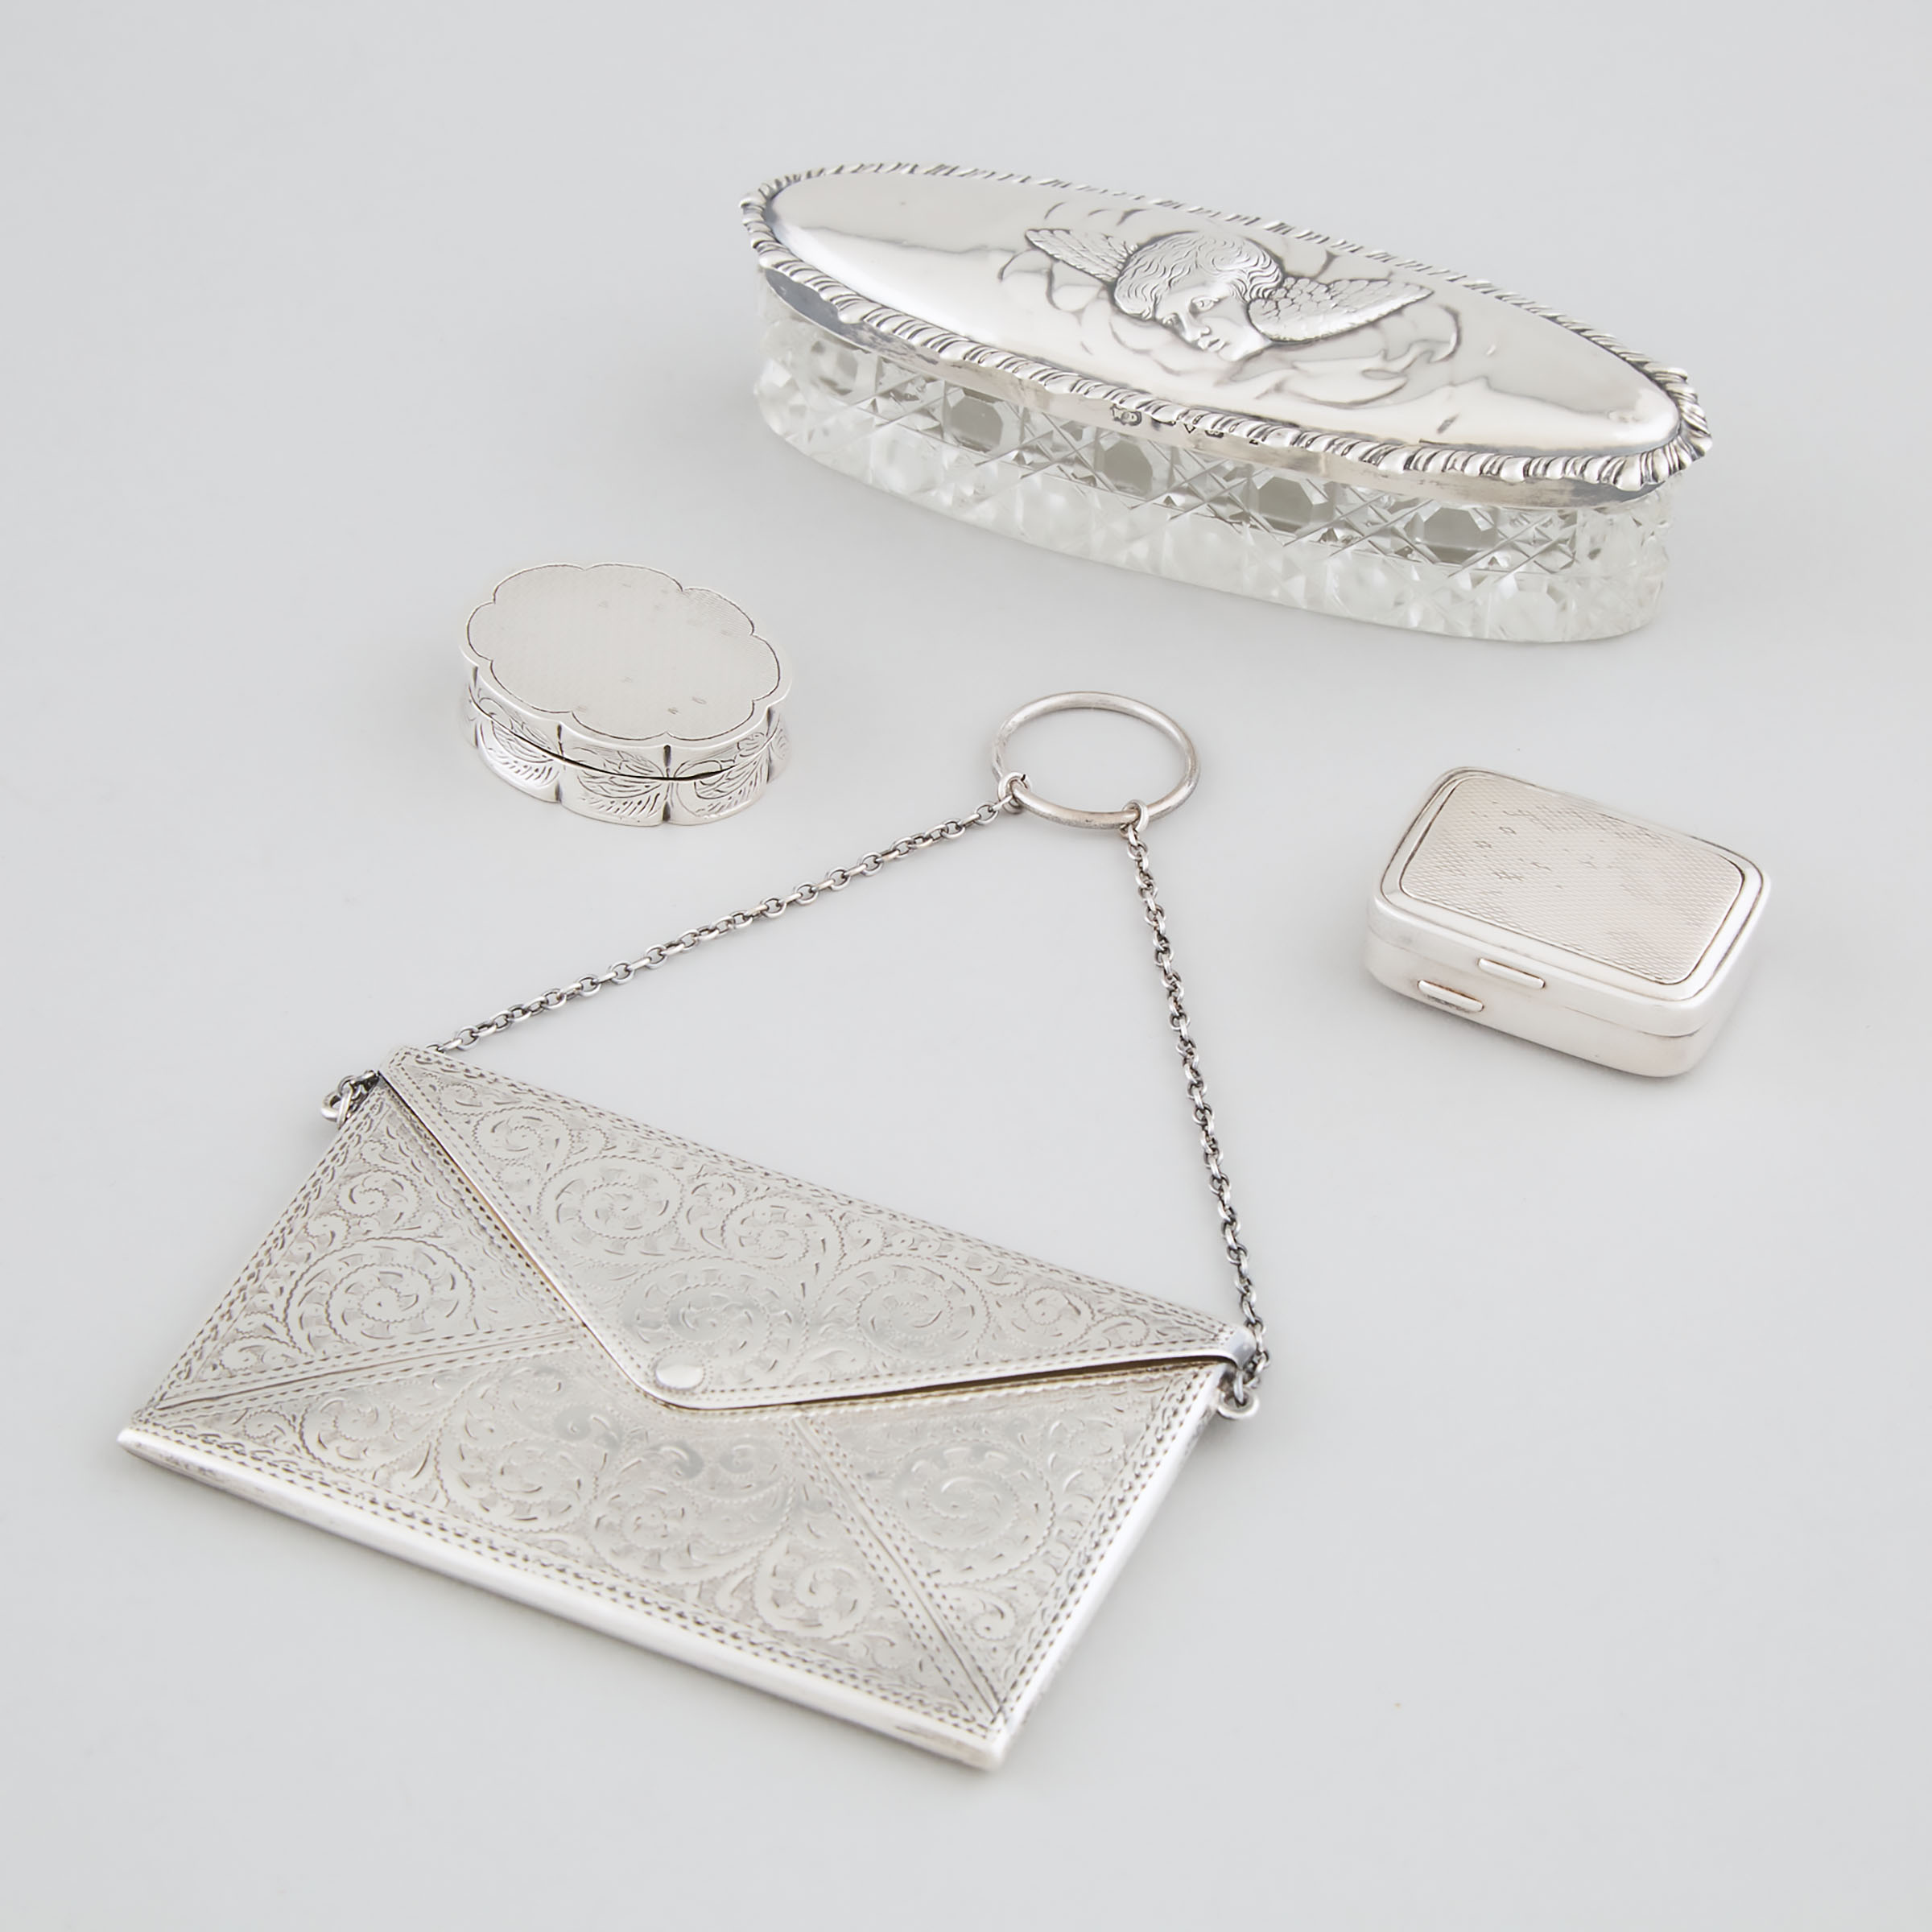 Three English and Norwegian Silver Boxes and a Purse-Form Card Case, 20th century